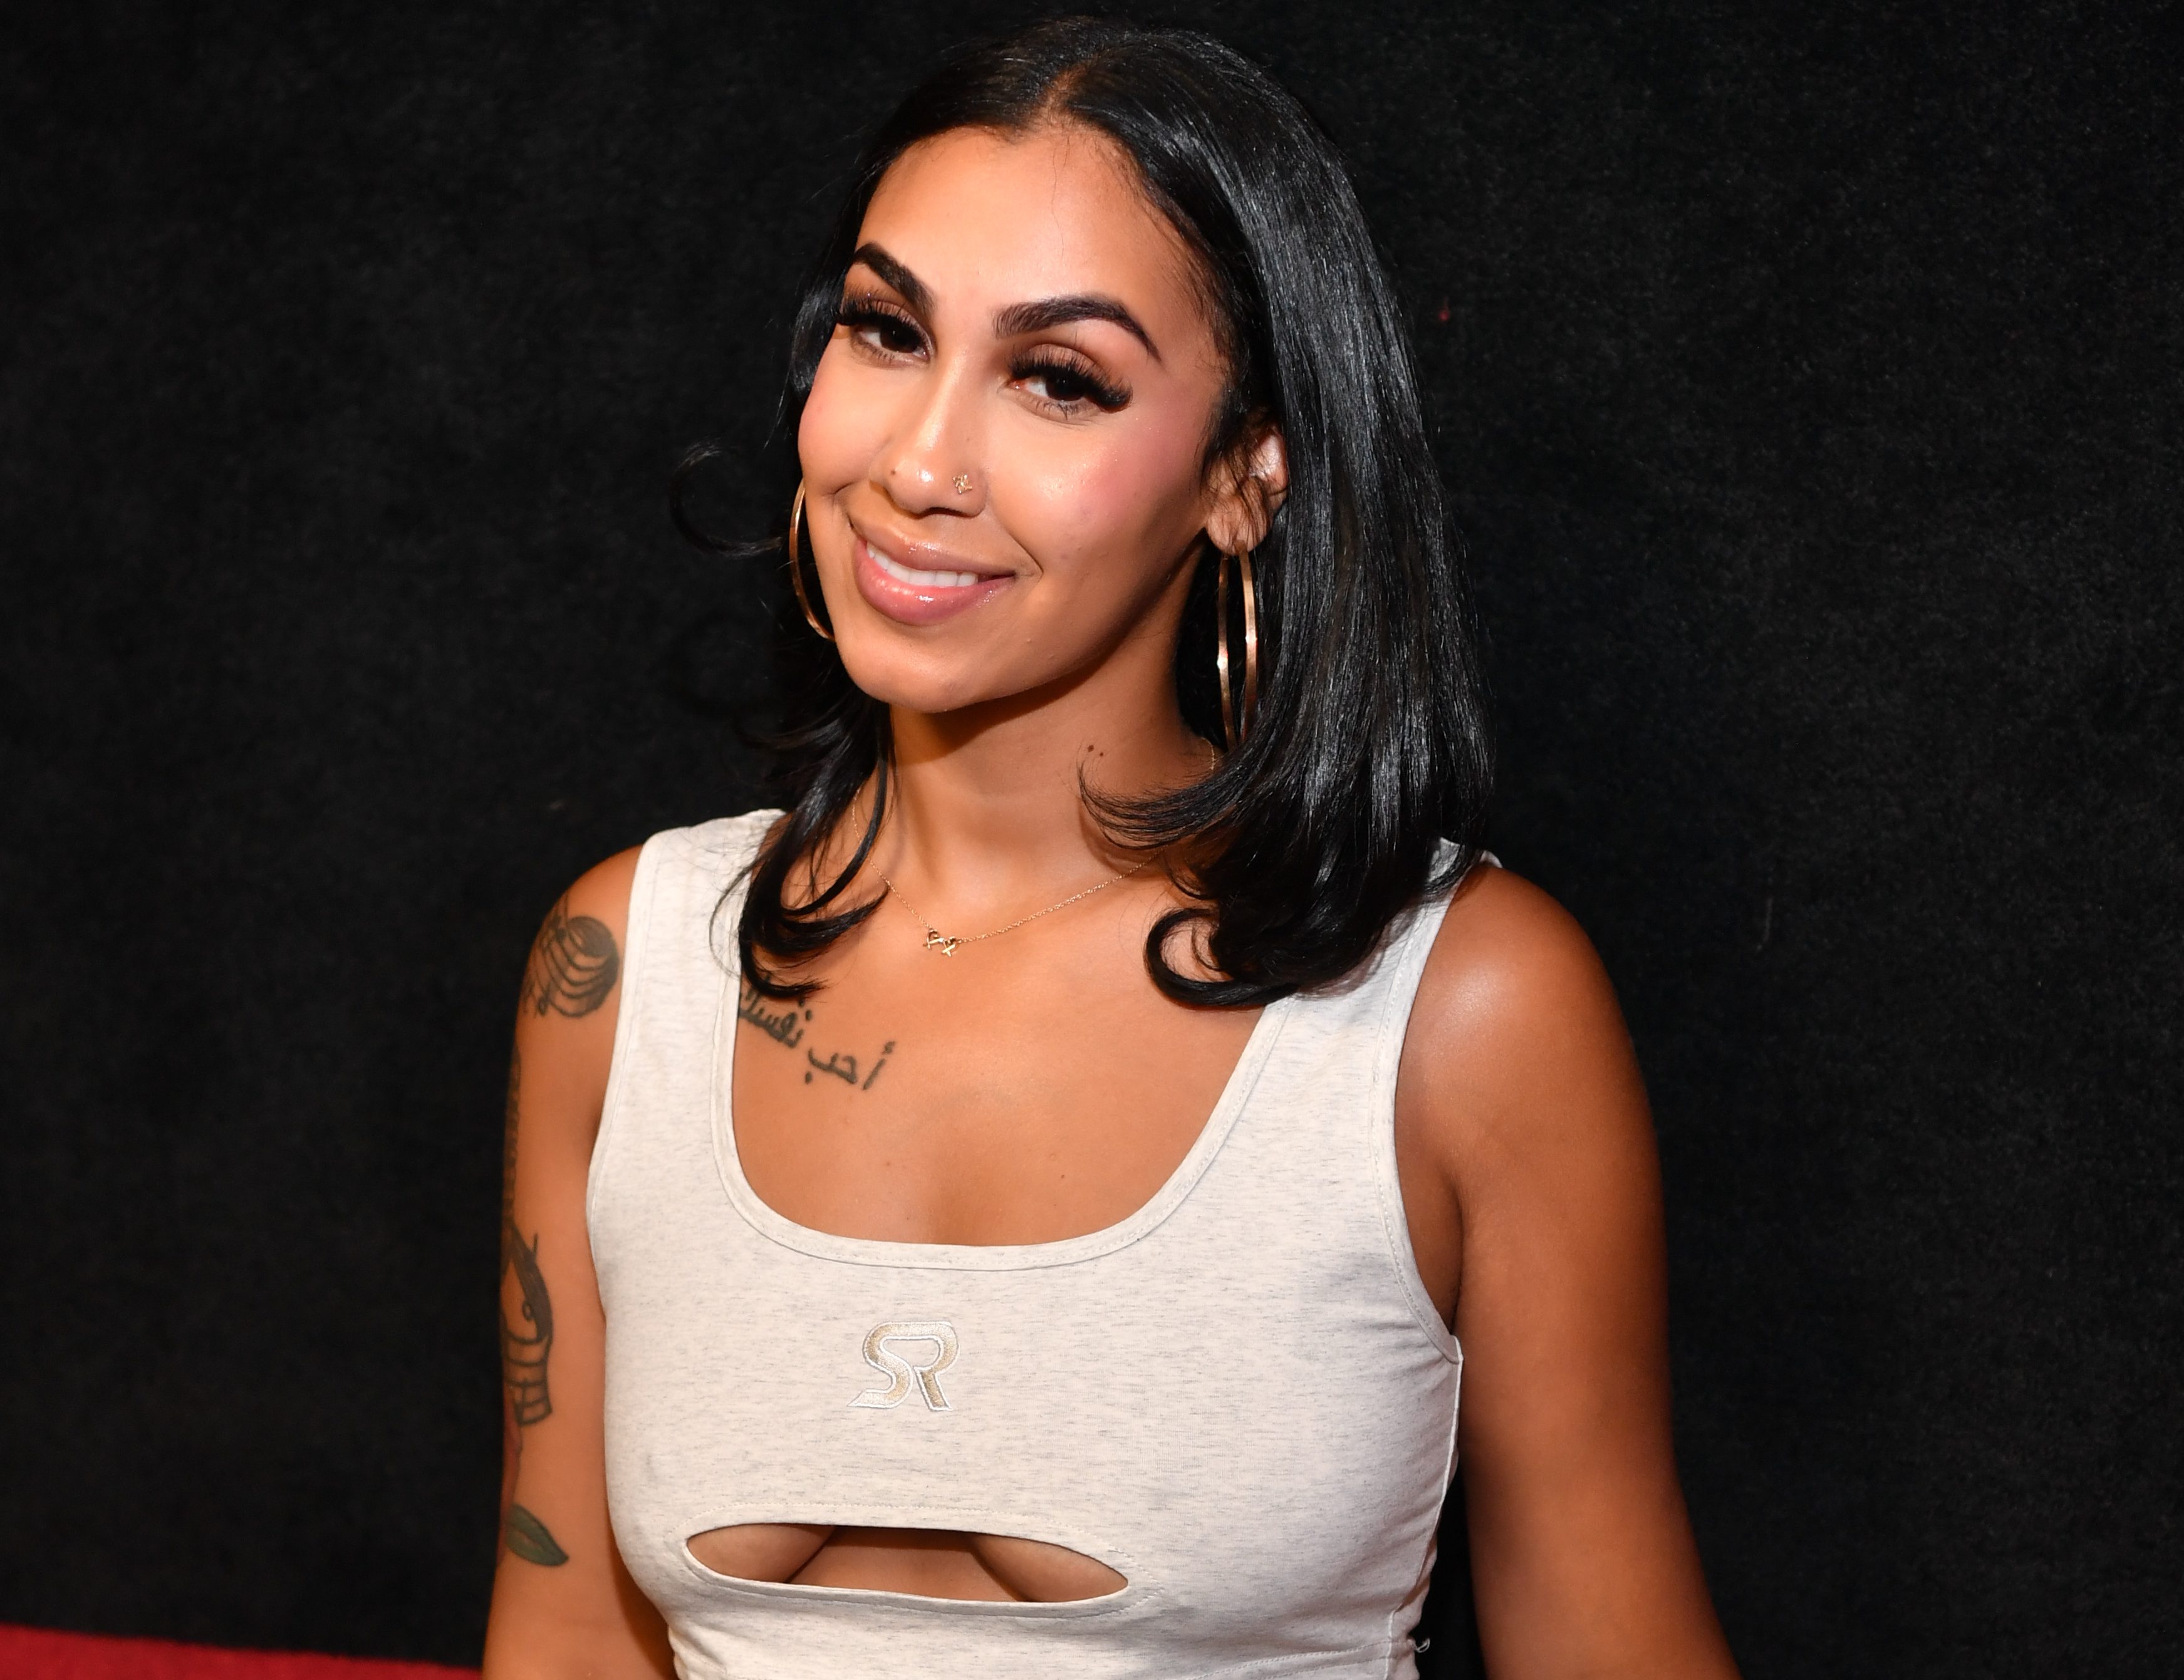 Queen Naija’s “Let’s Talk About It” Takes Centre Stage On Our “R&B Season” Update